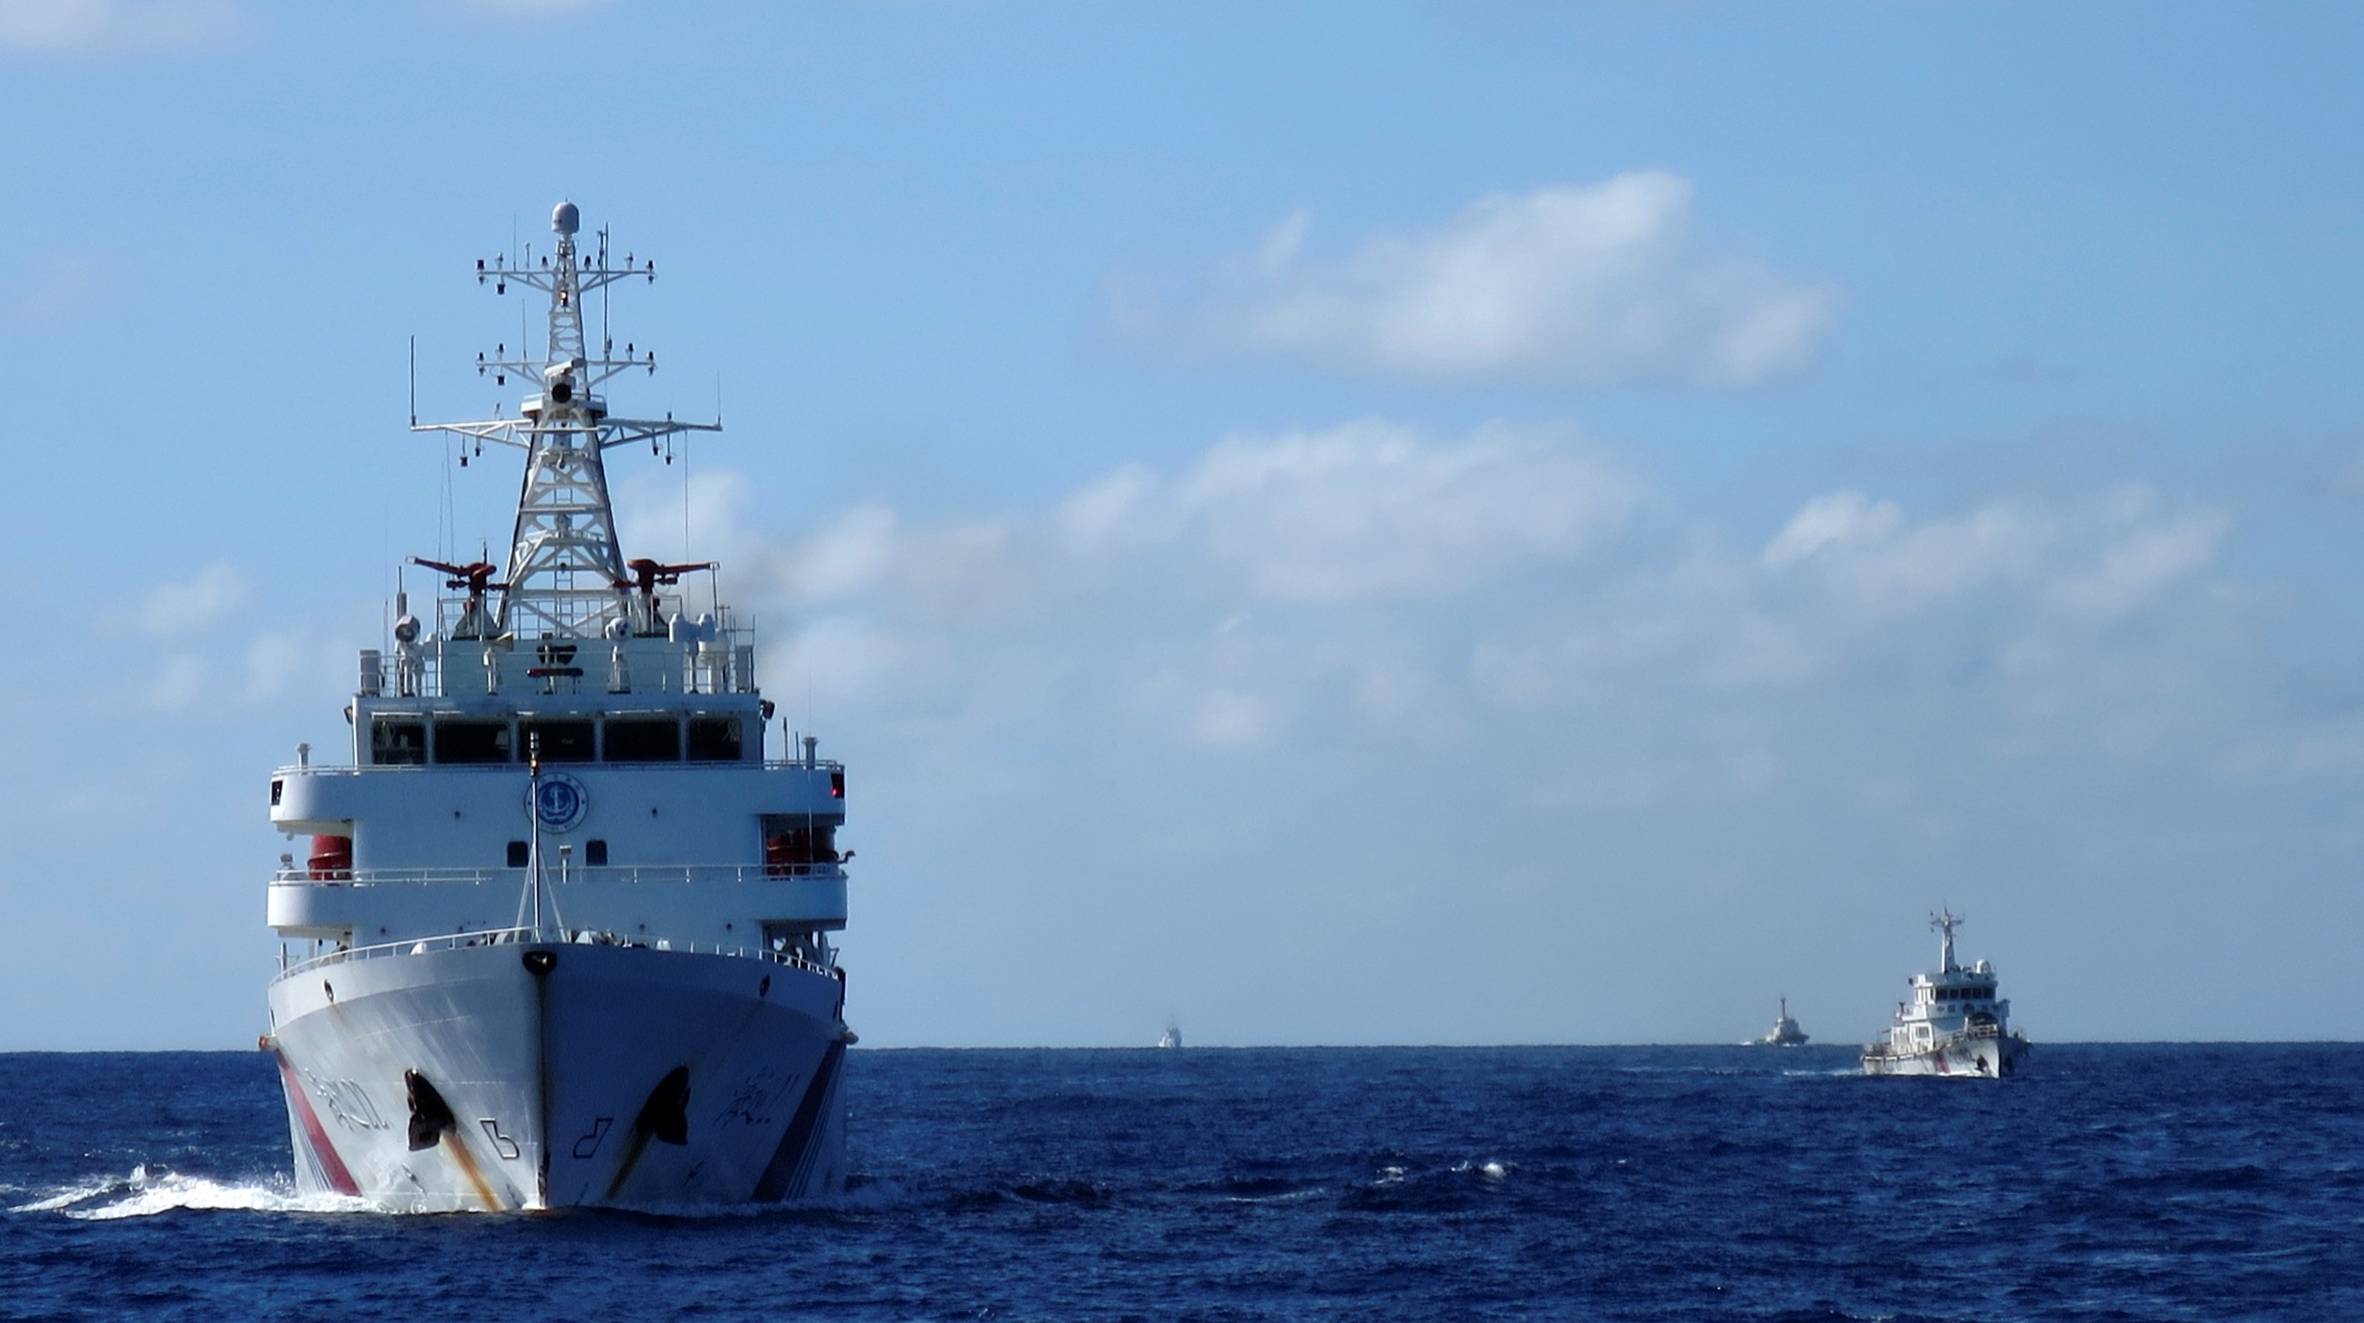 Chinese coast guard ships give chase to Vietnamese coast guard vessels (not pictured) after they came within 10 nautical miles of the Haiyang Shiyou 981 oil rig, known in Vietnam as HD-981, in the South China Sea in July 2014. | REUTERS